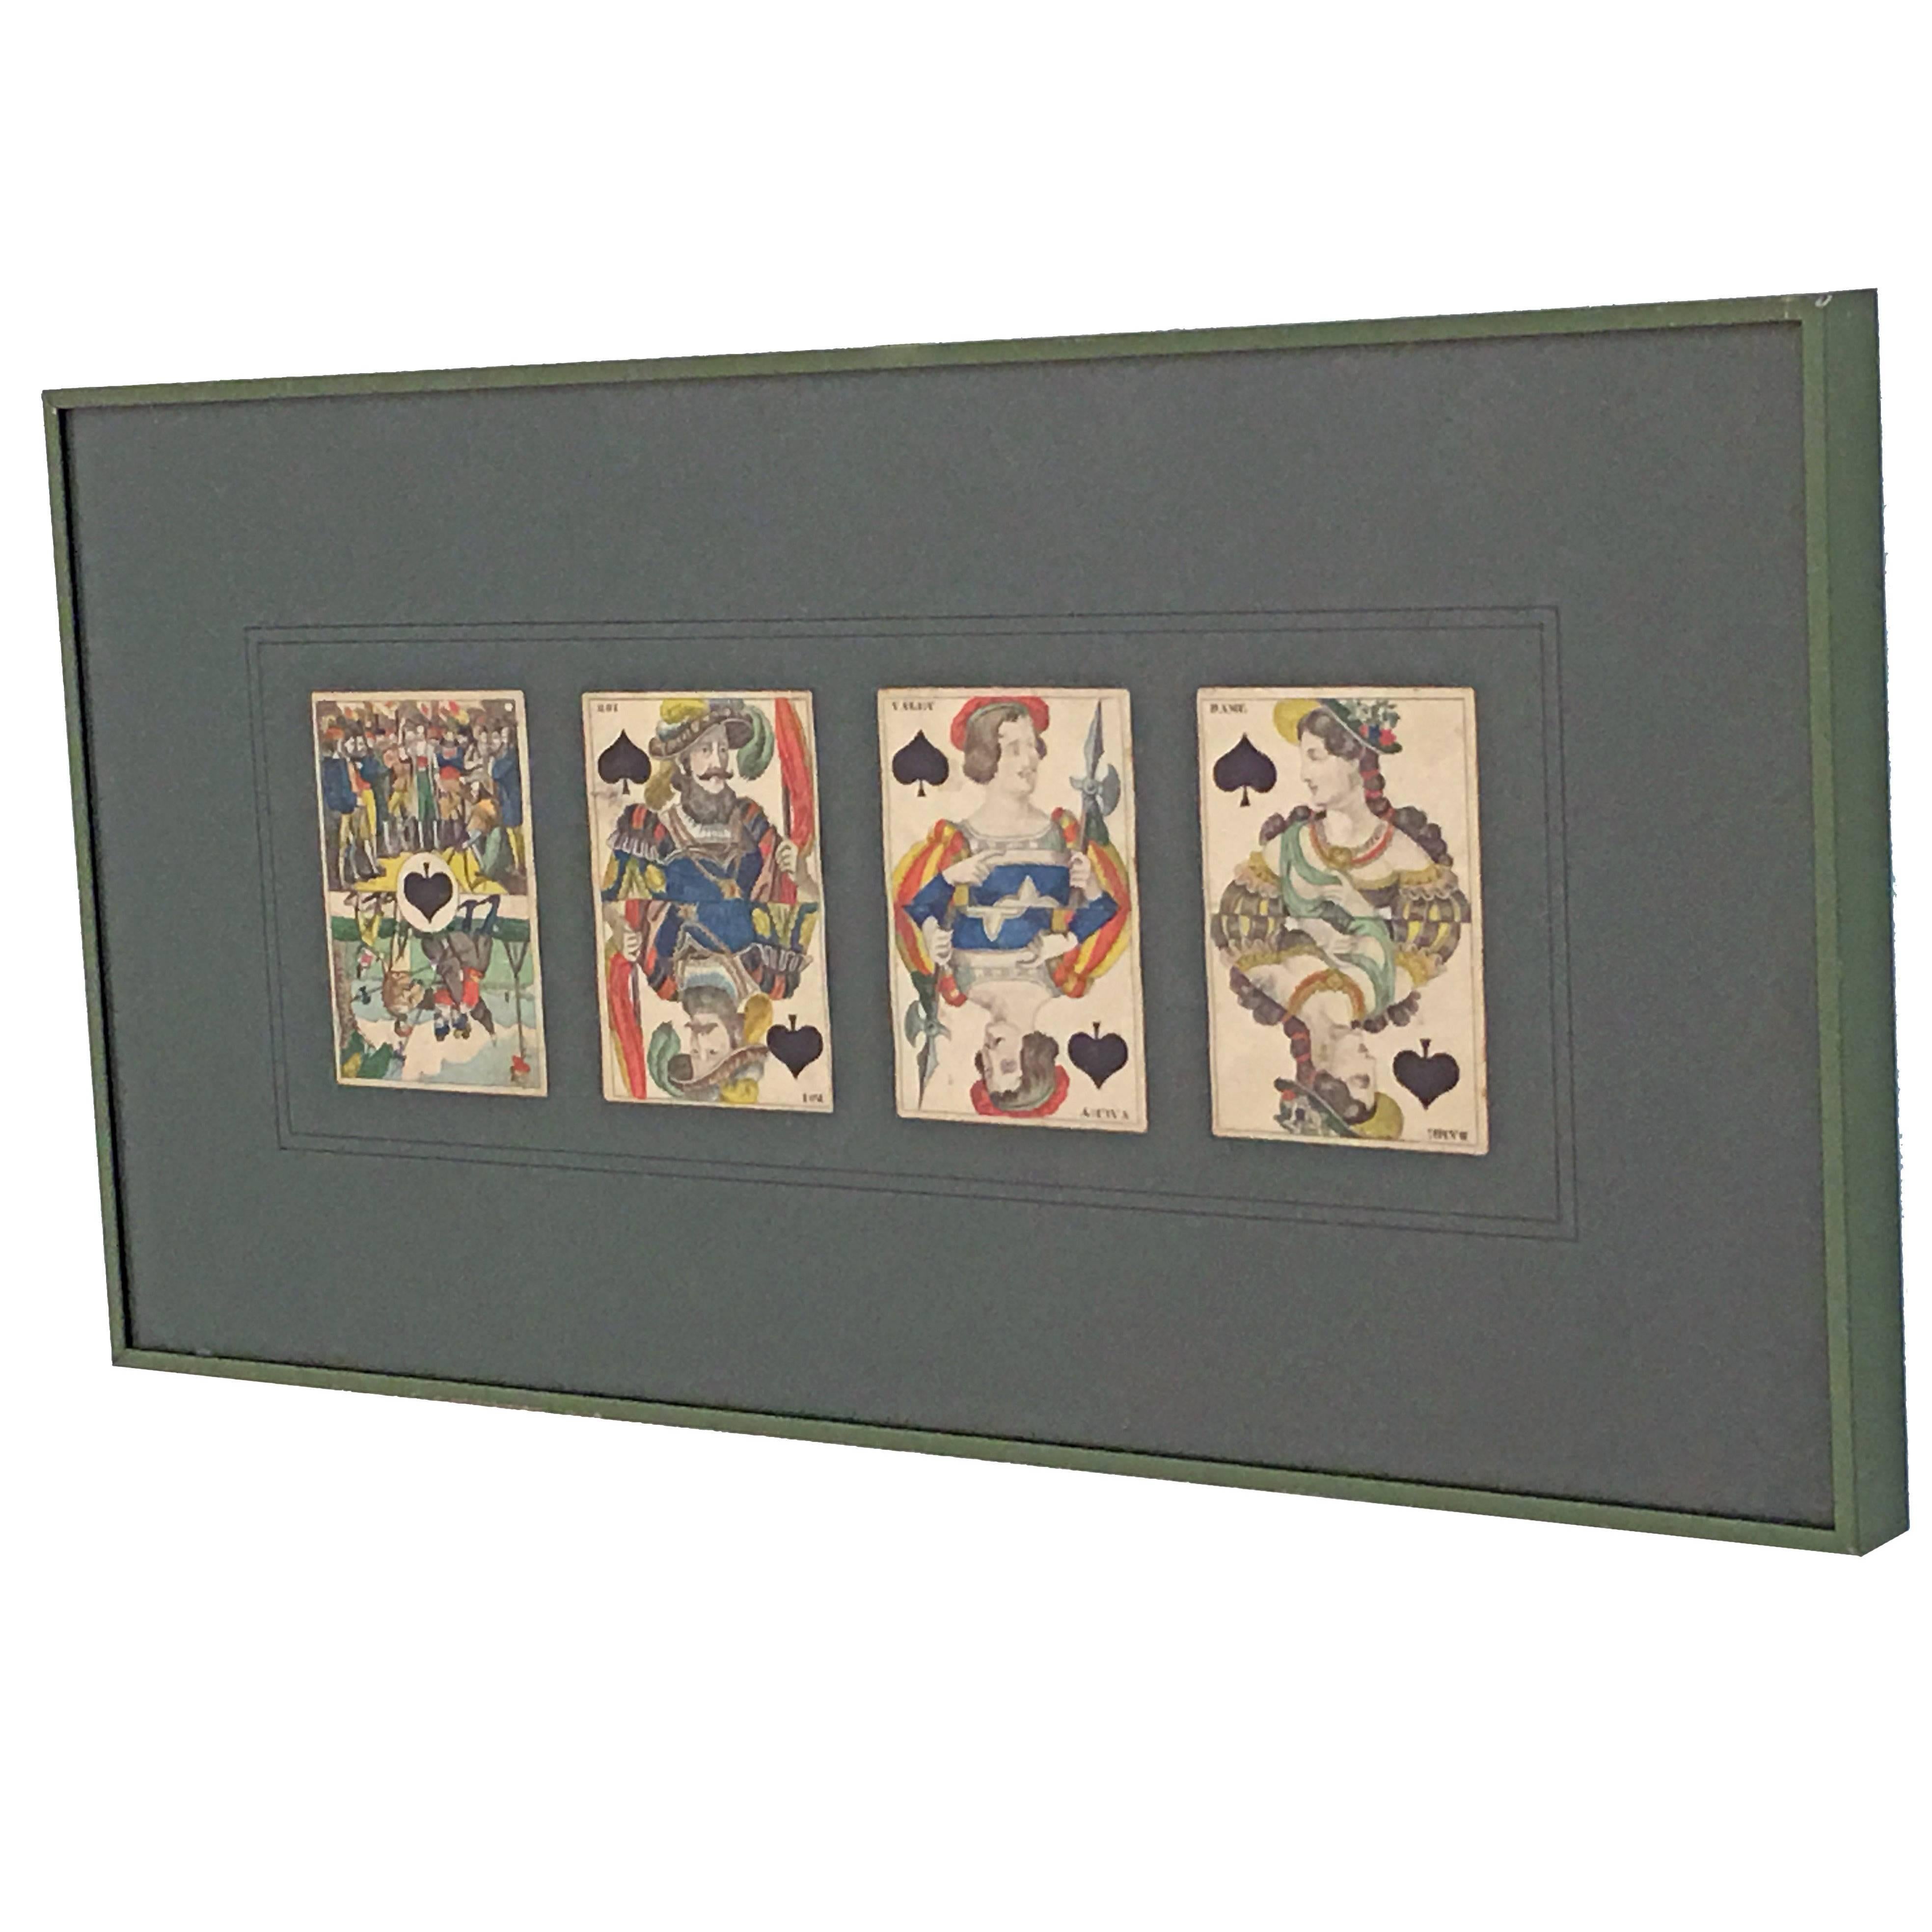 Custom mounted and framed Austrian playing cards. Each engraved card then hand-painted. Collection of 62 cards total mounted and framed in 13 frames. There are five frame sizes as follows:
Measures: Four frames height 18.75